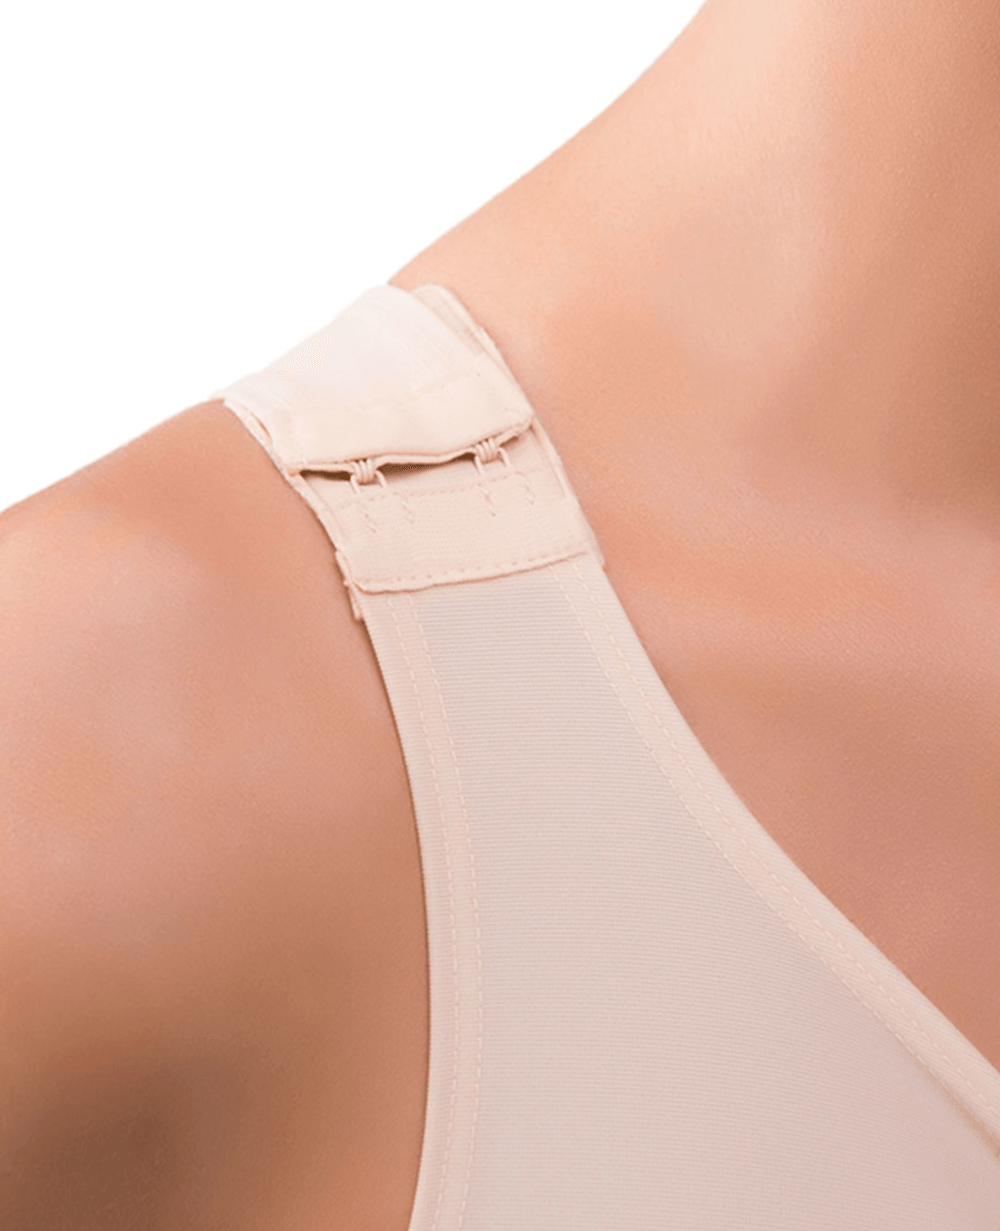 Breast Surgery Support Bra with 2" Elastic Band (BR02)